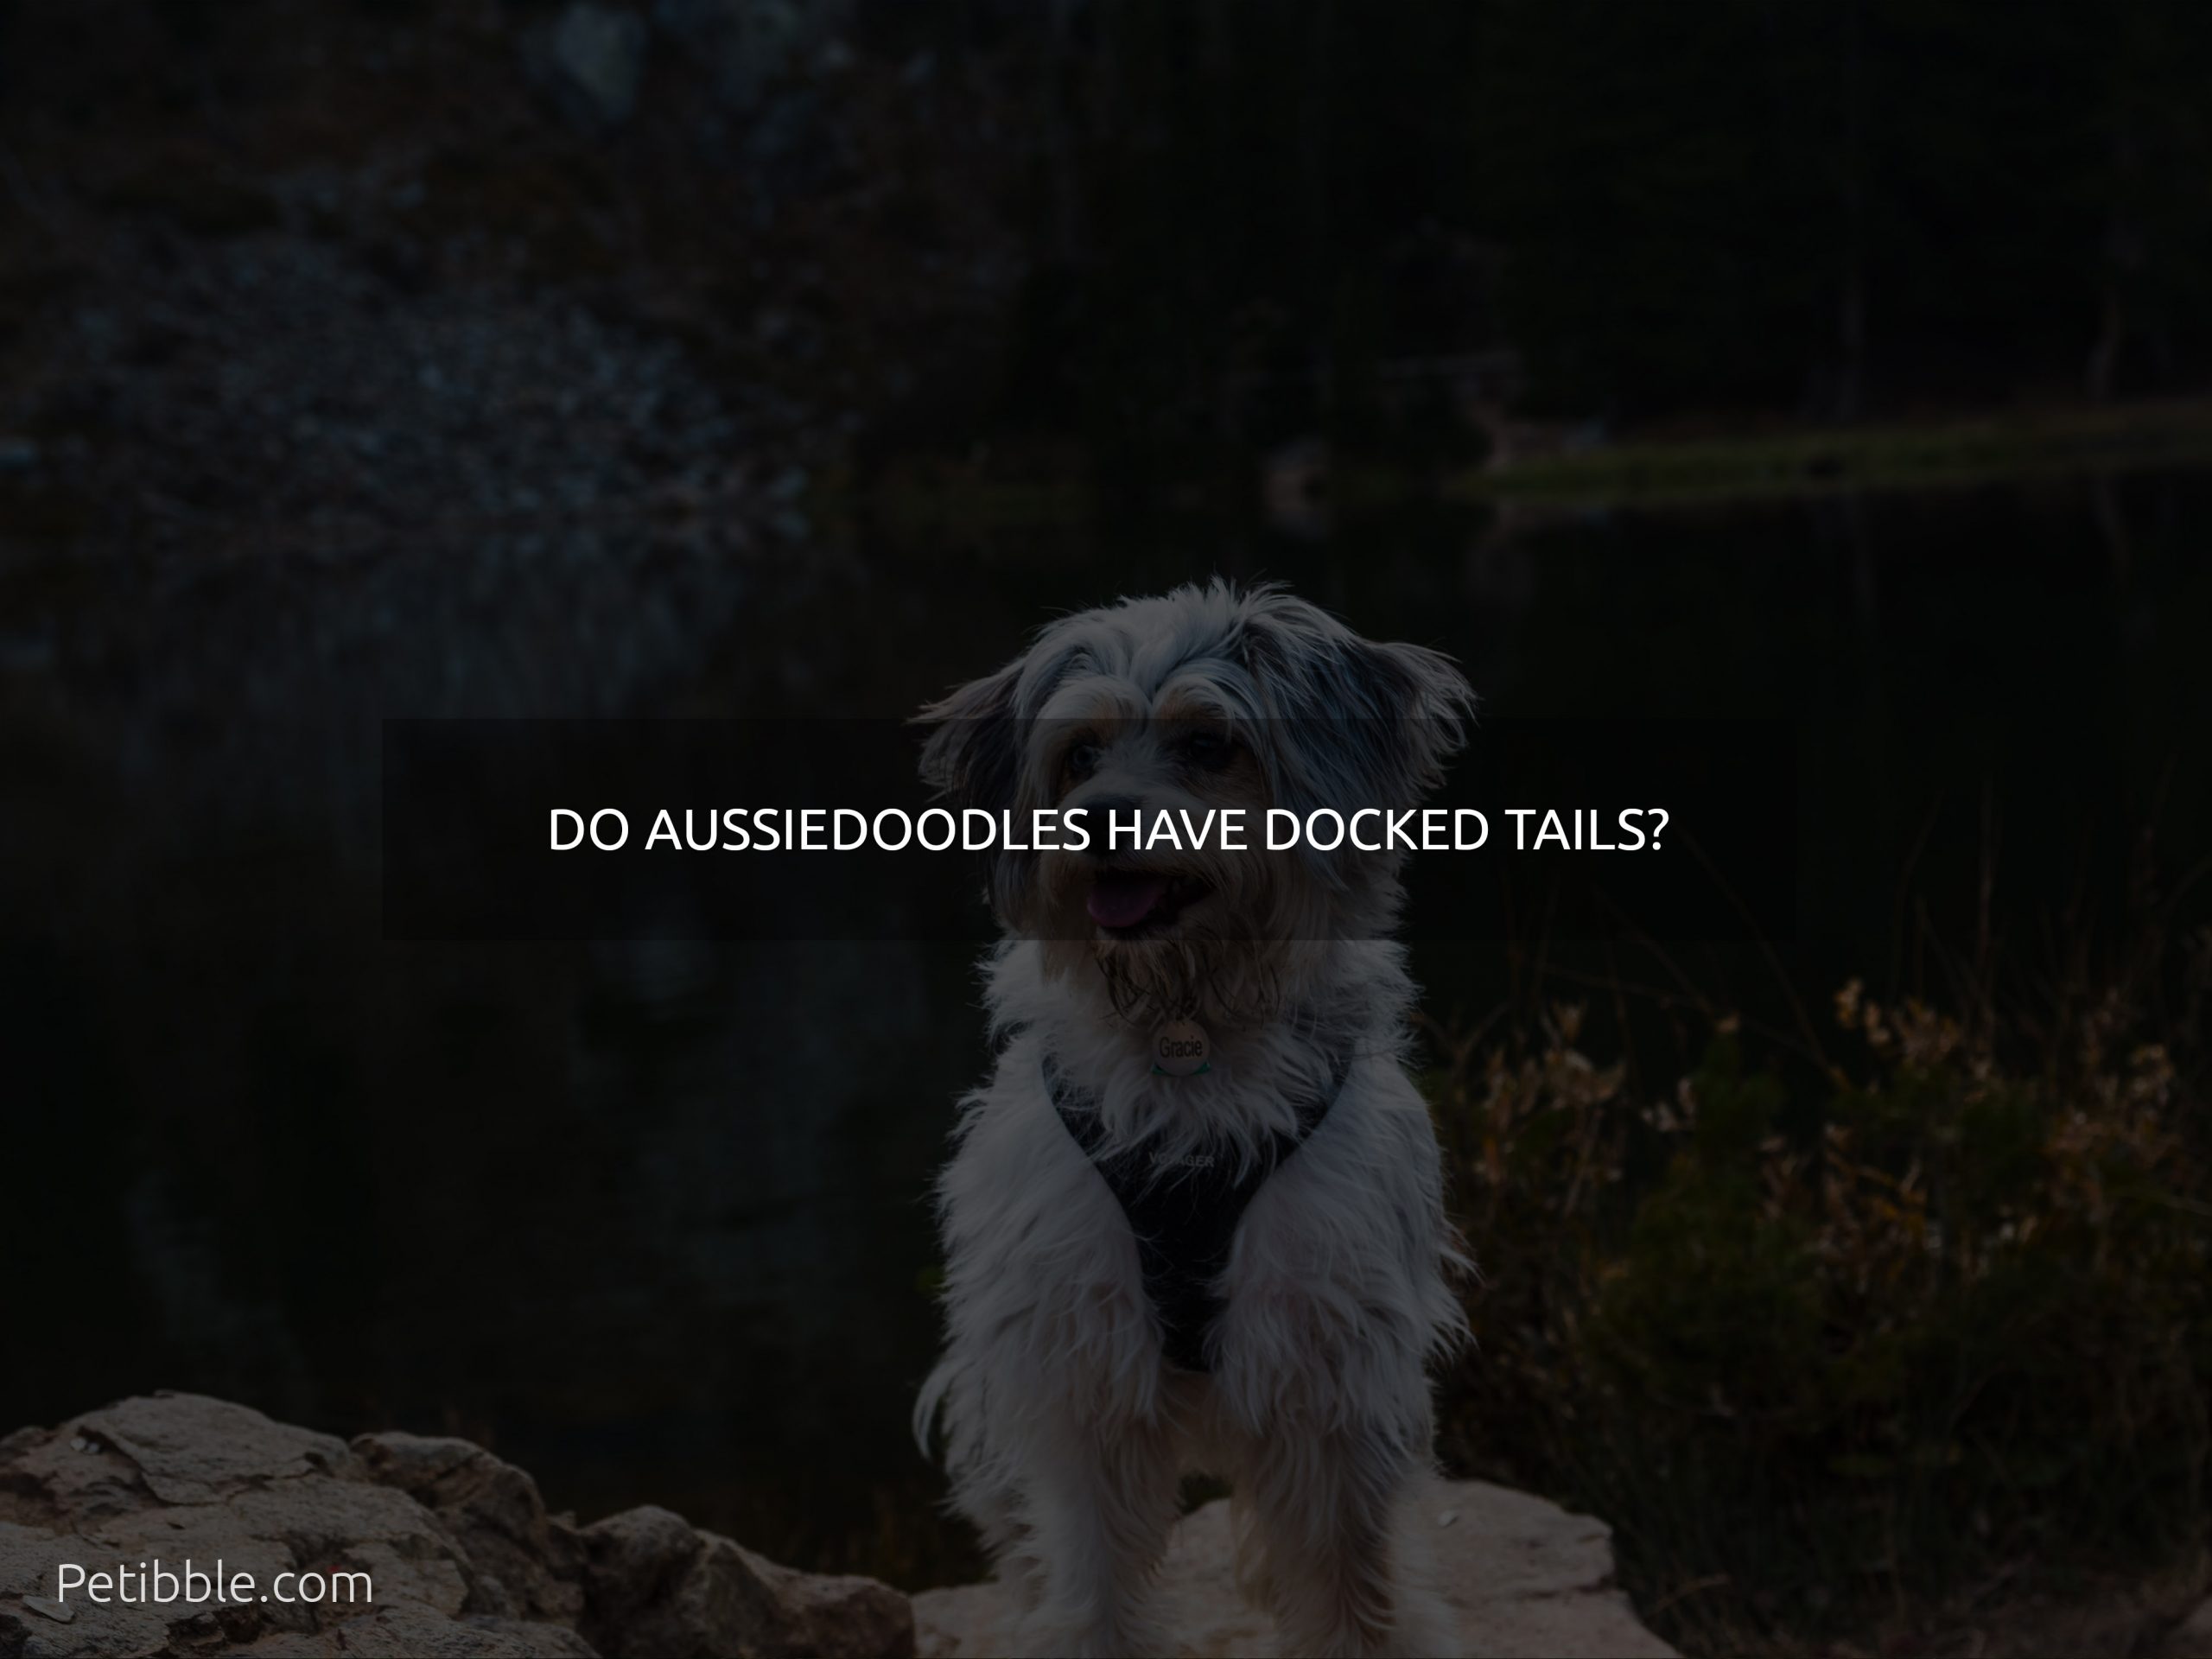 Do Aussiedoodles have docked tails?